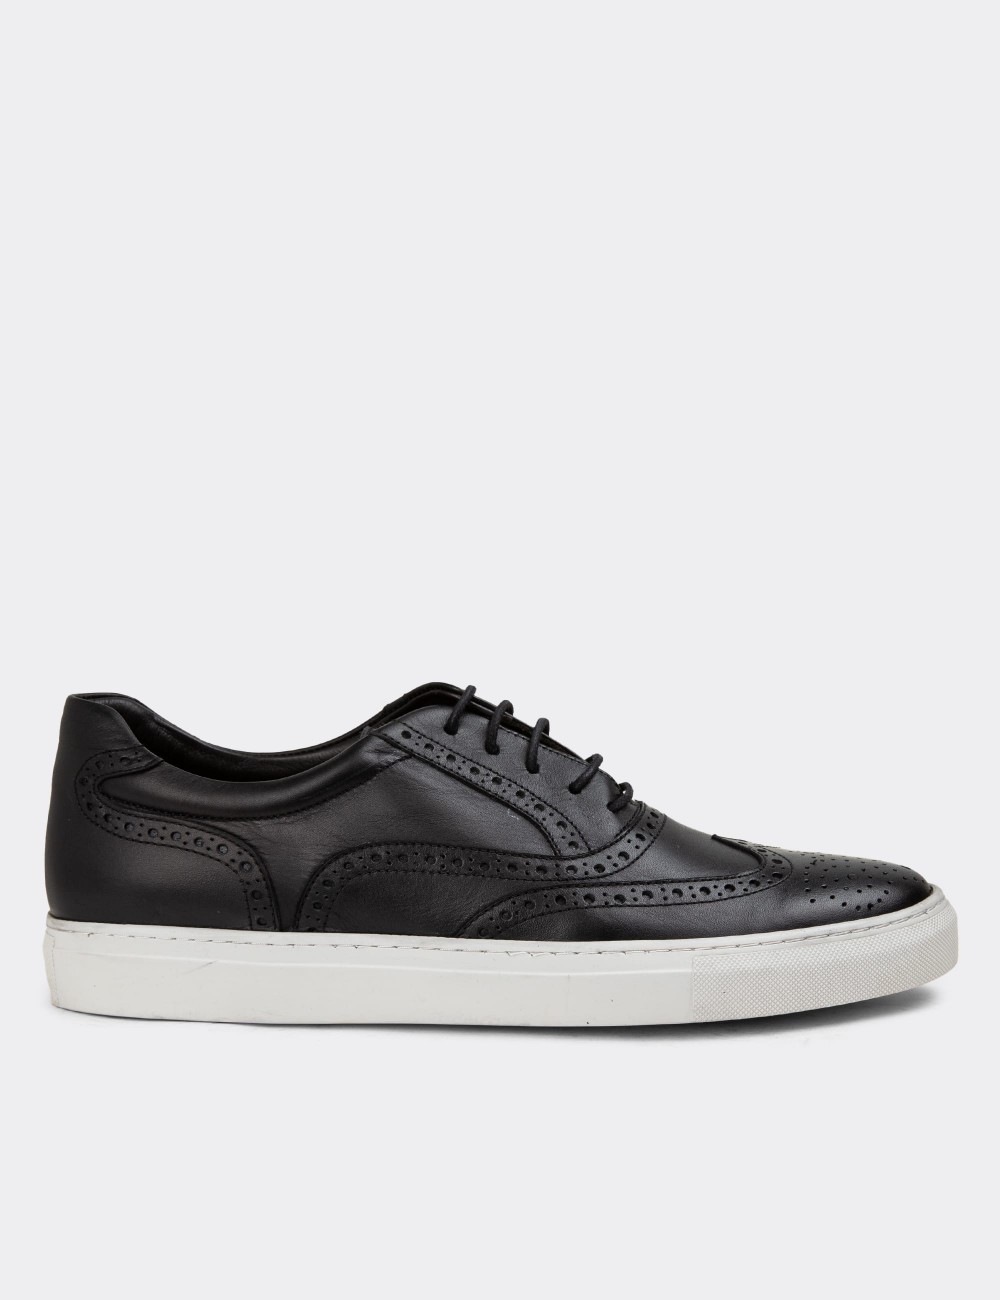 Black Leather Sneakers - 01637MSYHC08